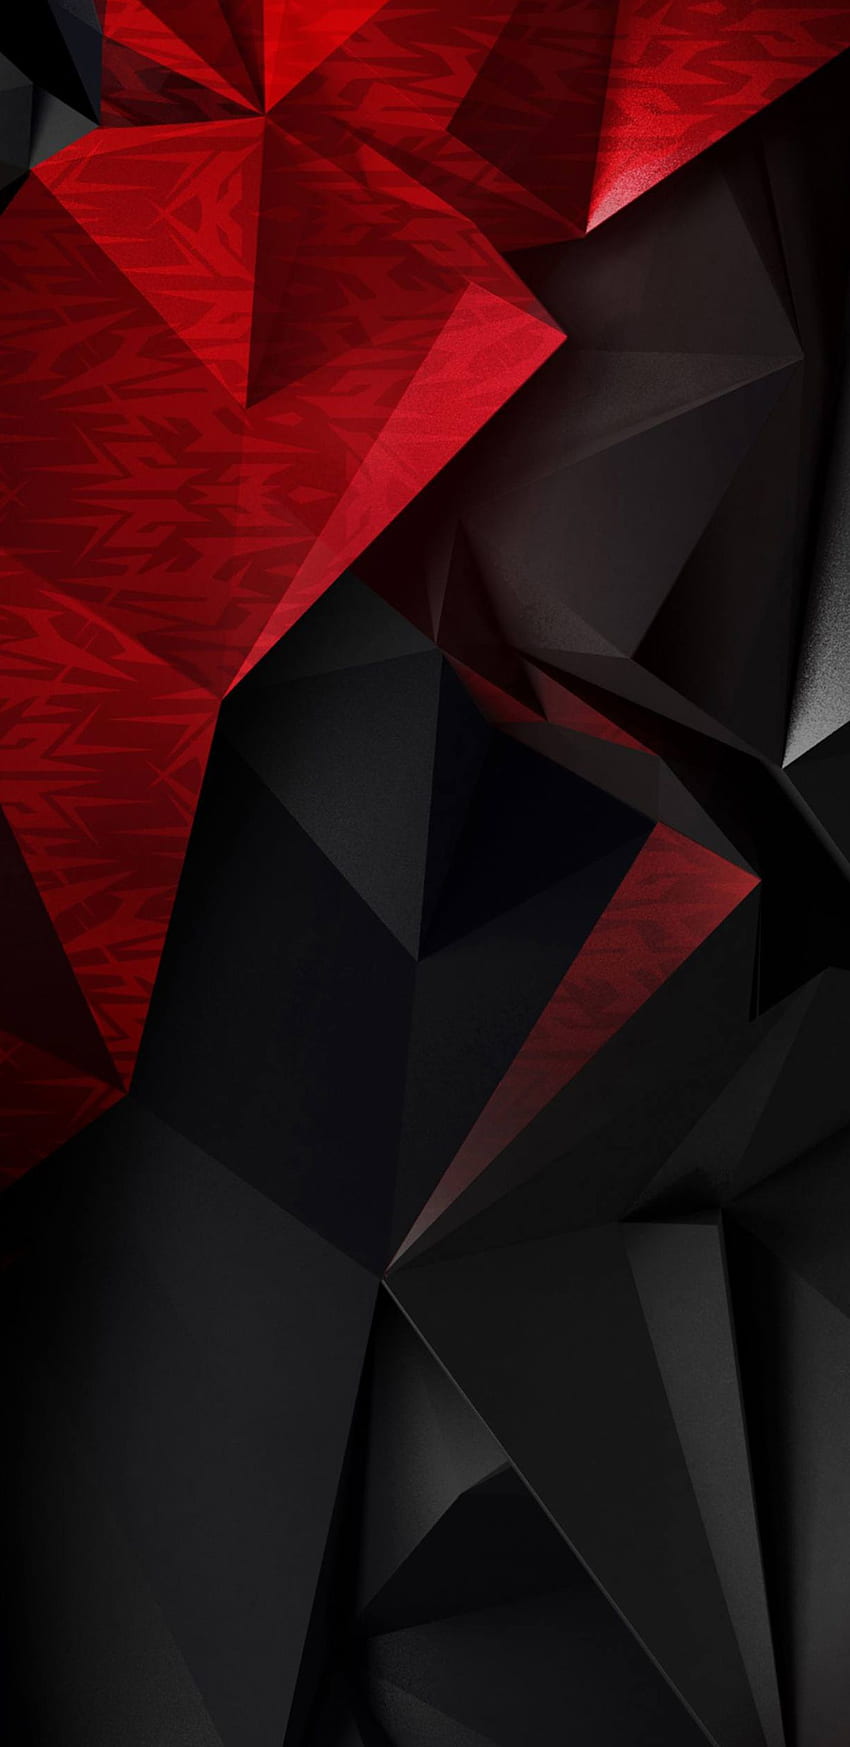 Abstract 3D Red and Black Polygons for Samsung Galaxy S9, Red Grey and Black HD phone wallpaper